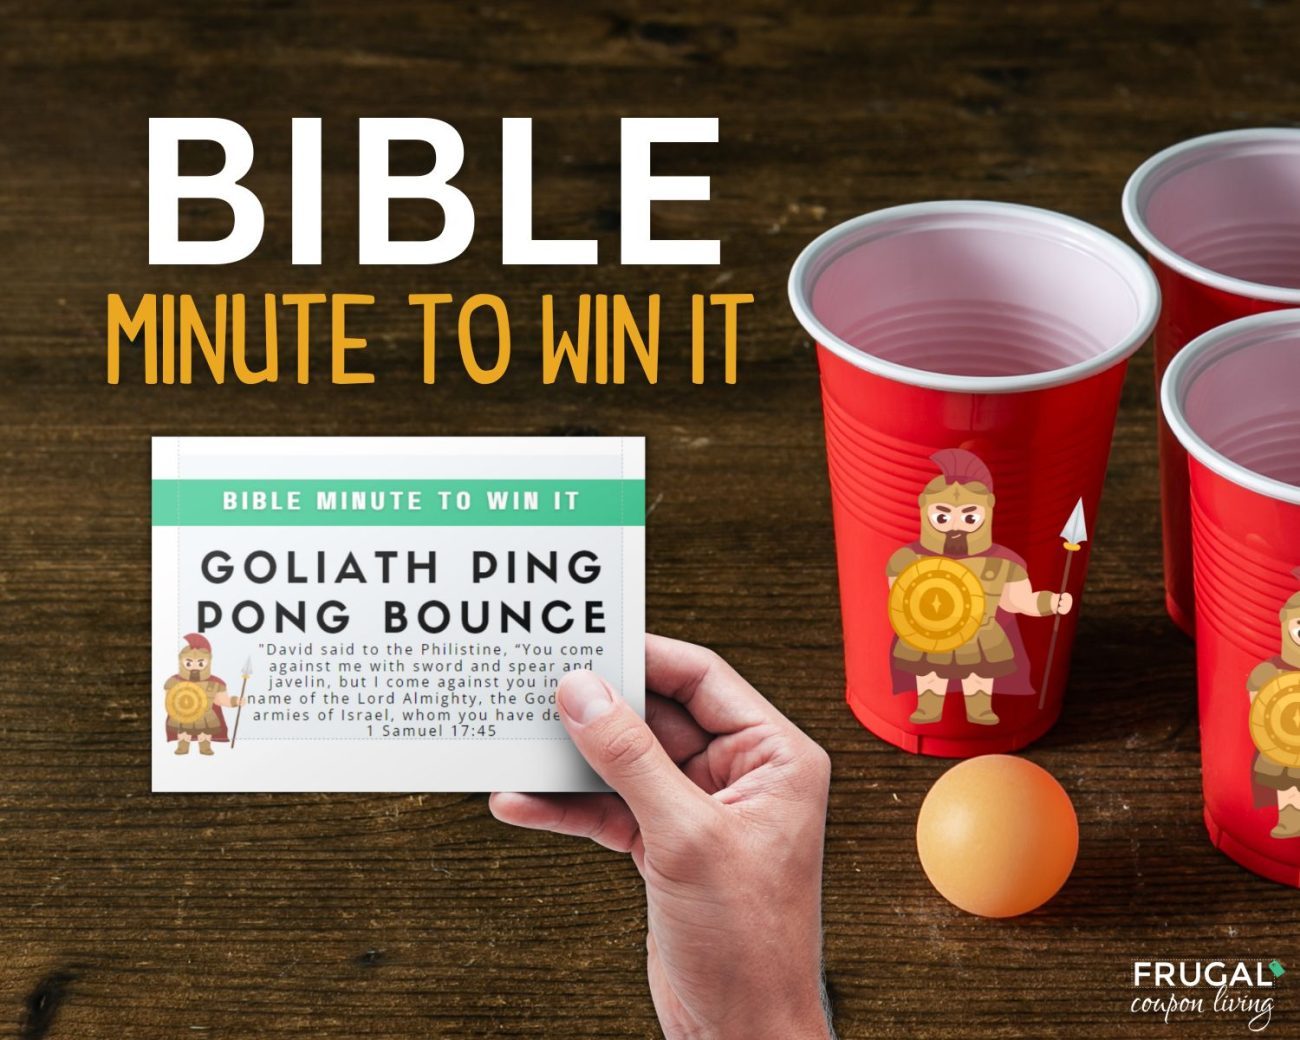 ping pong bounce david and goliath sunday schools lesson for teens